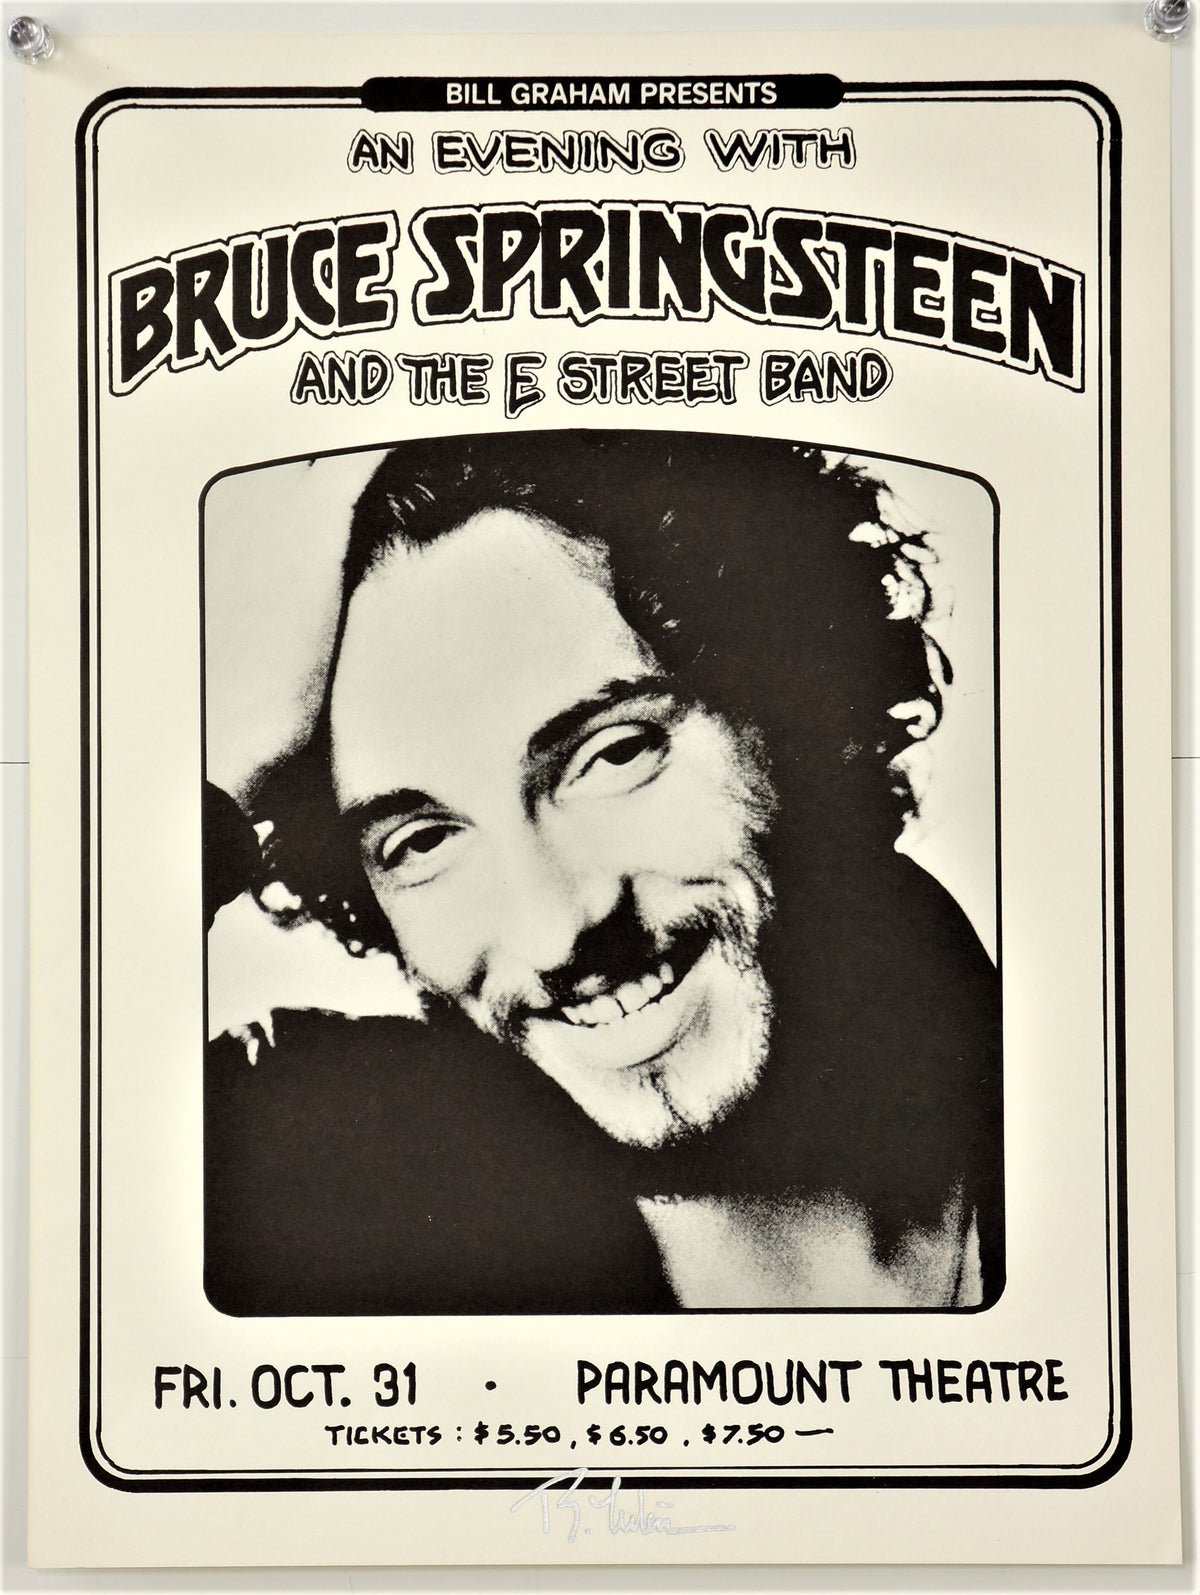 Bruce Springsteen at the Paramount Theatre - Authentic Vintage Poster